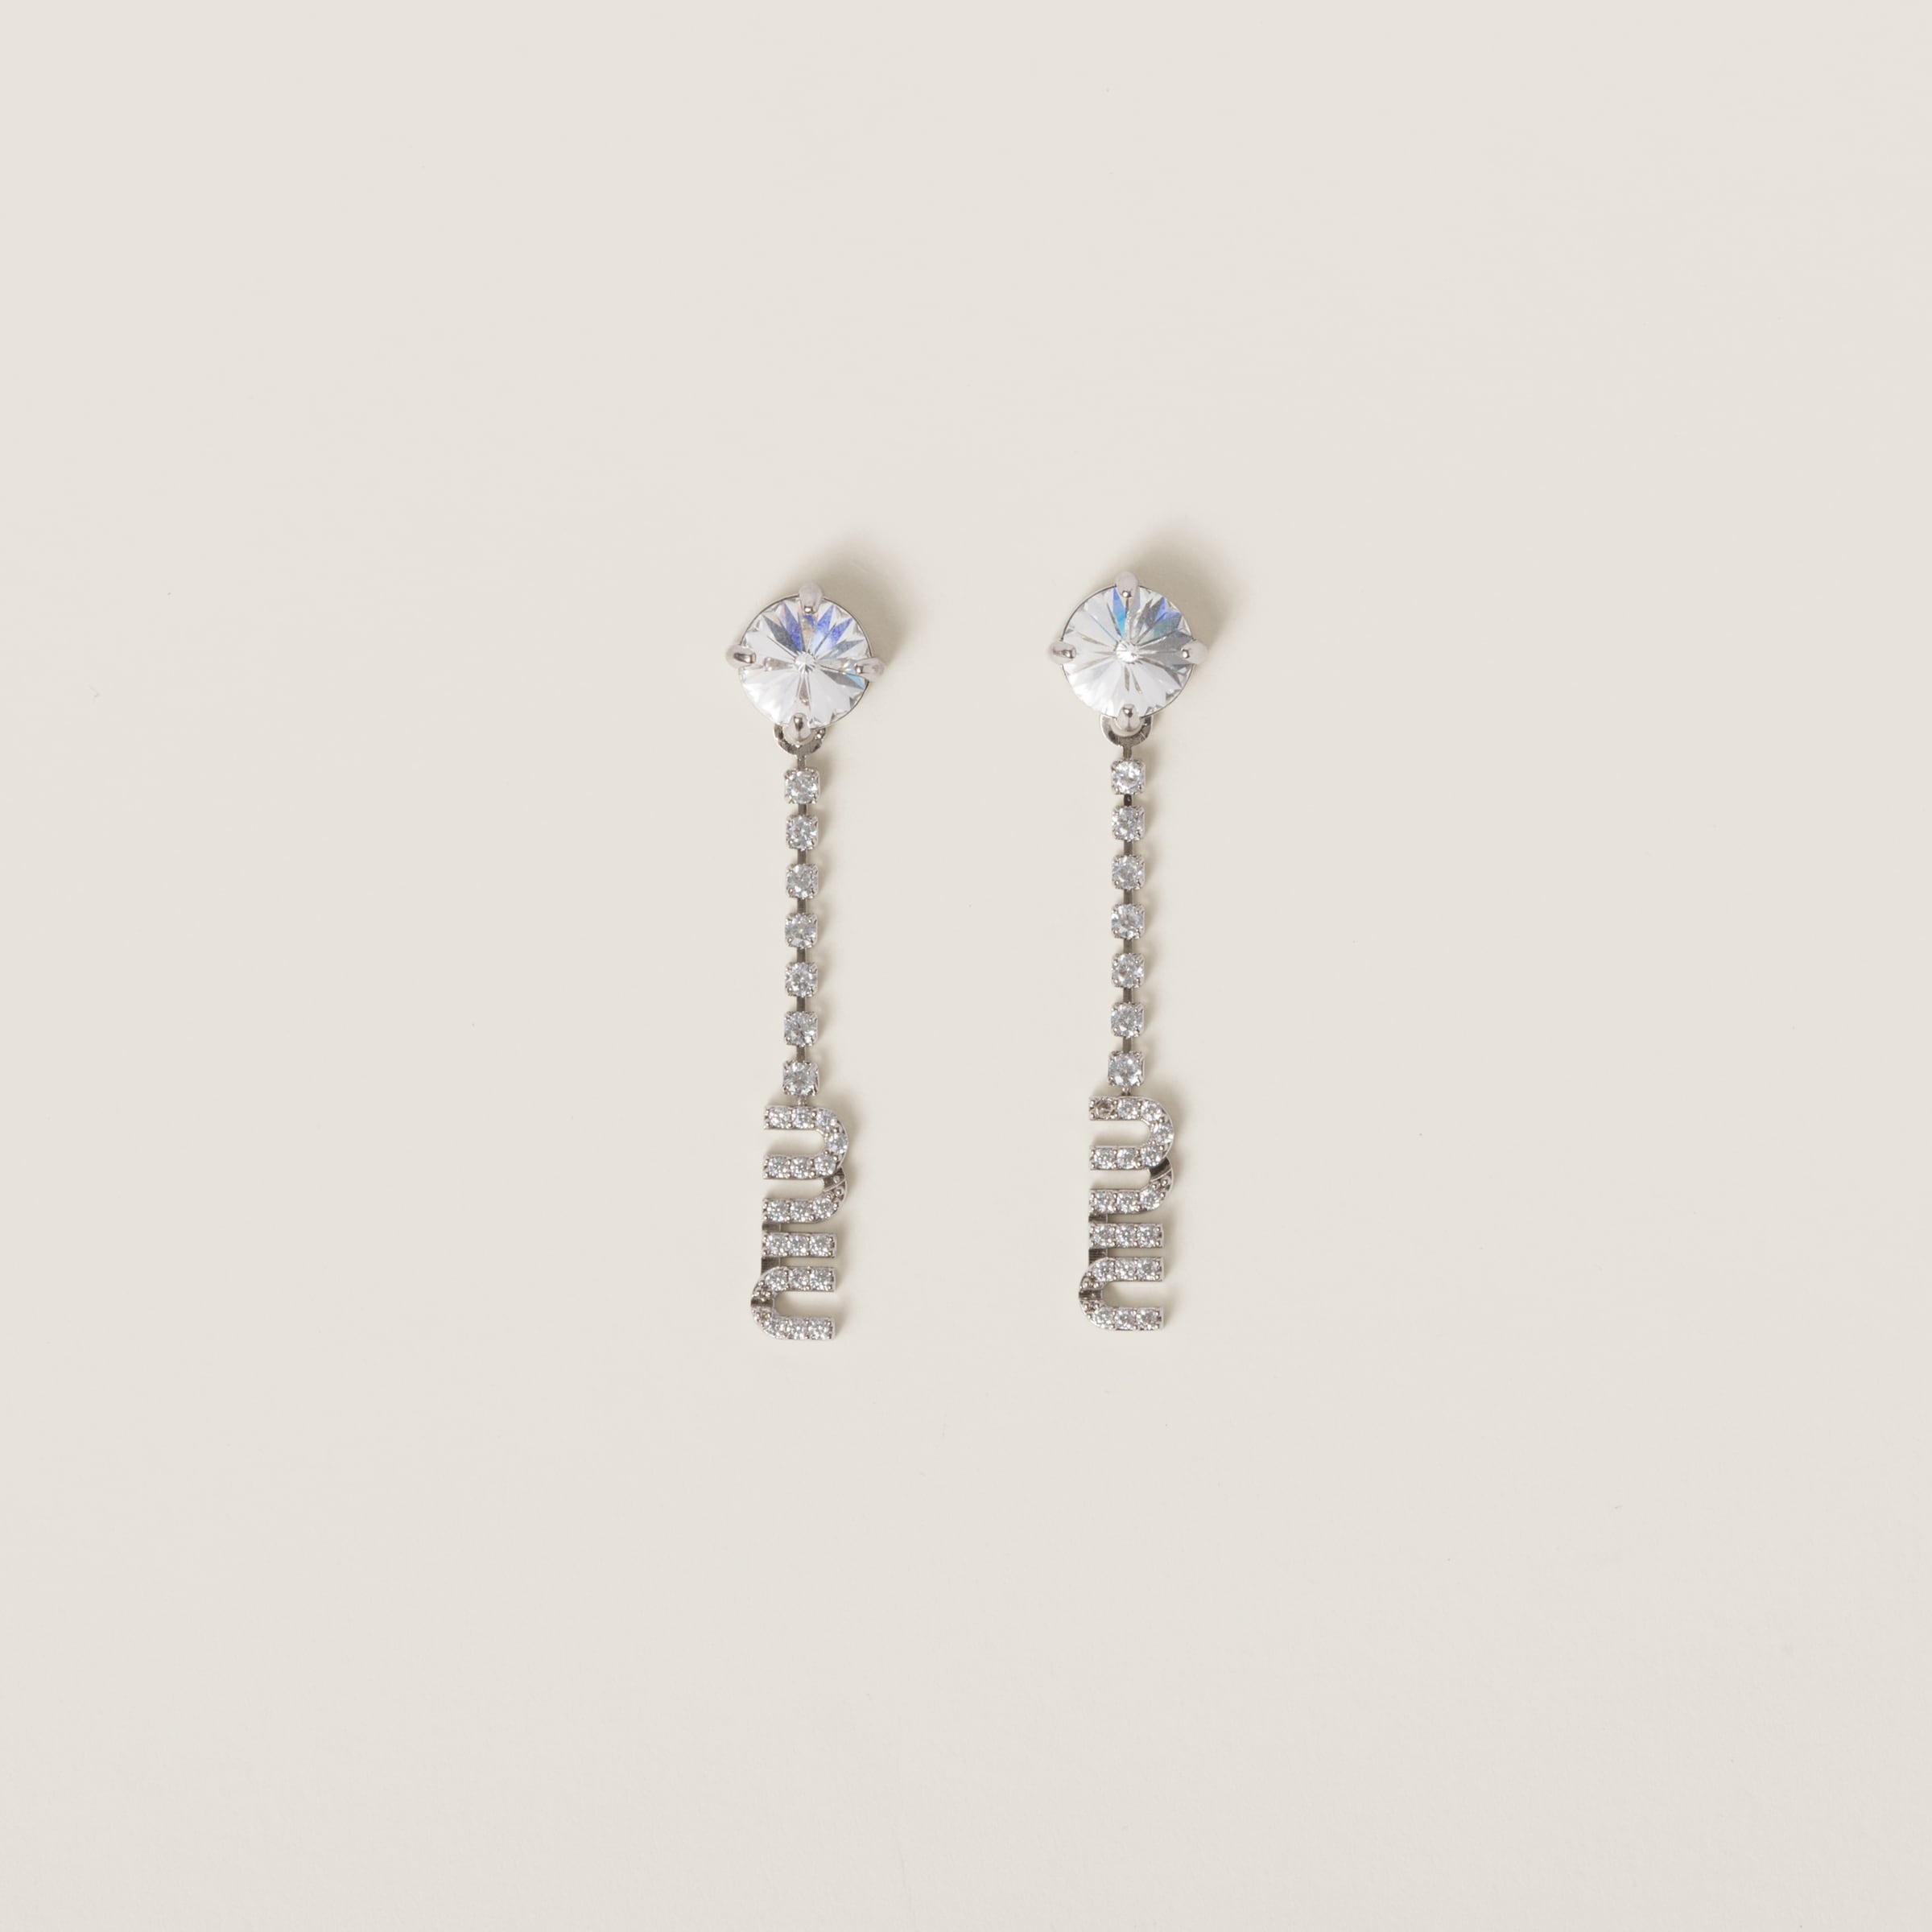 Metal earrings with crystals - 1